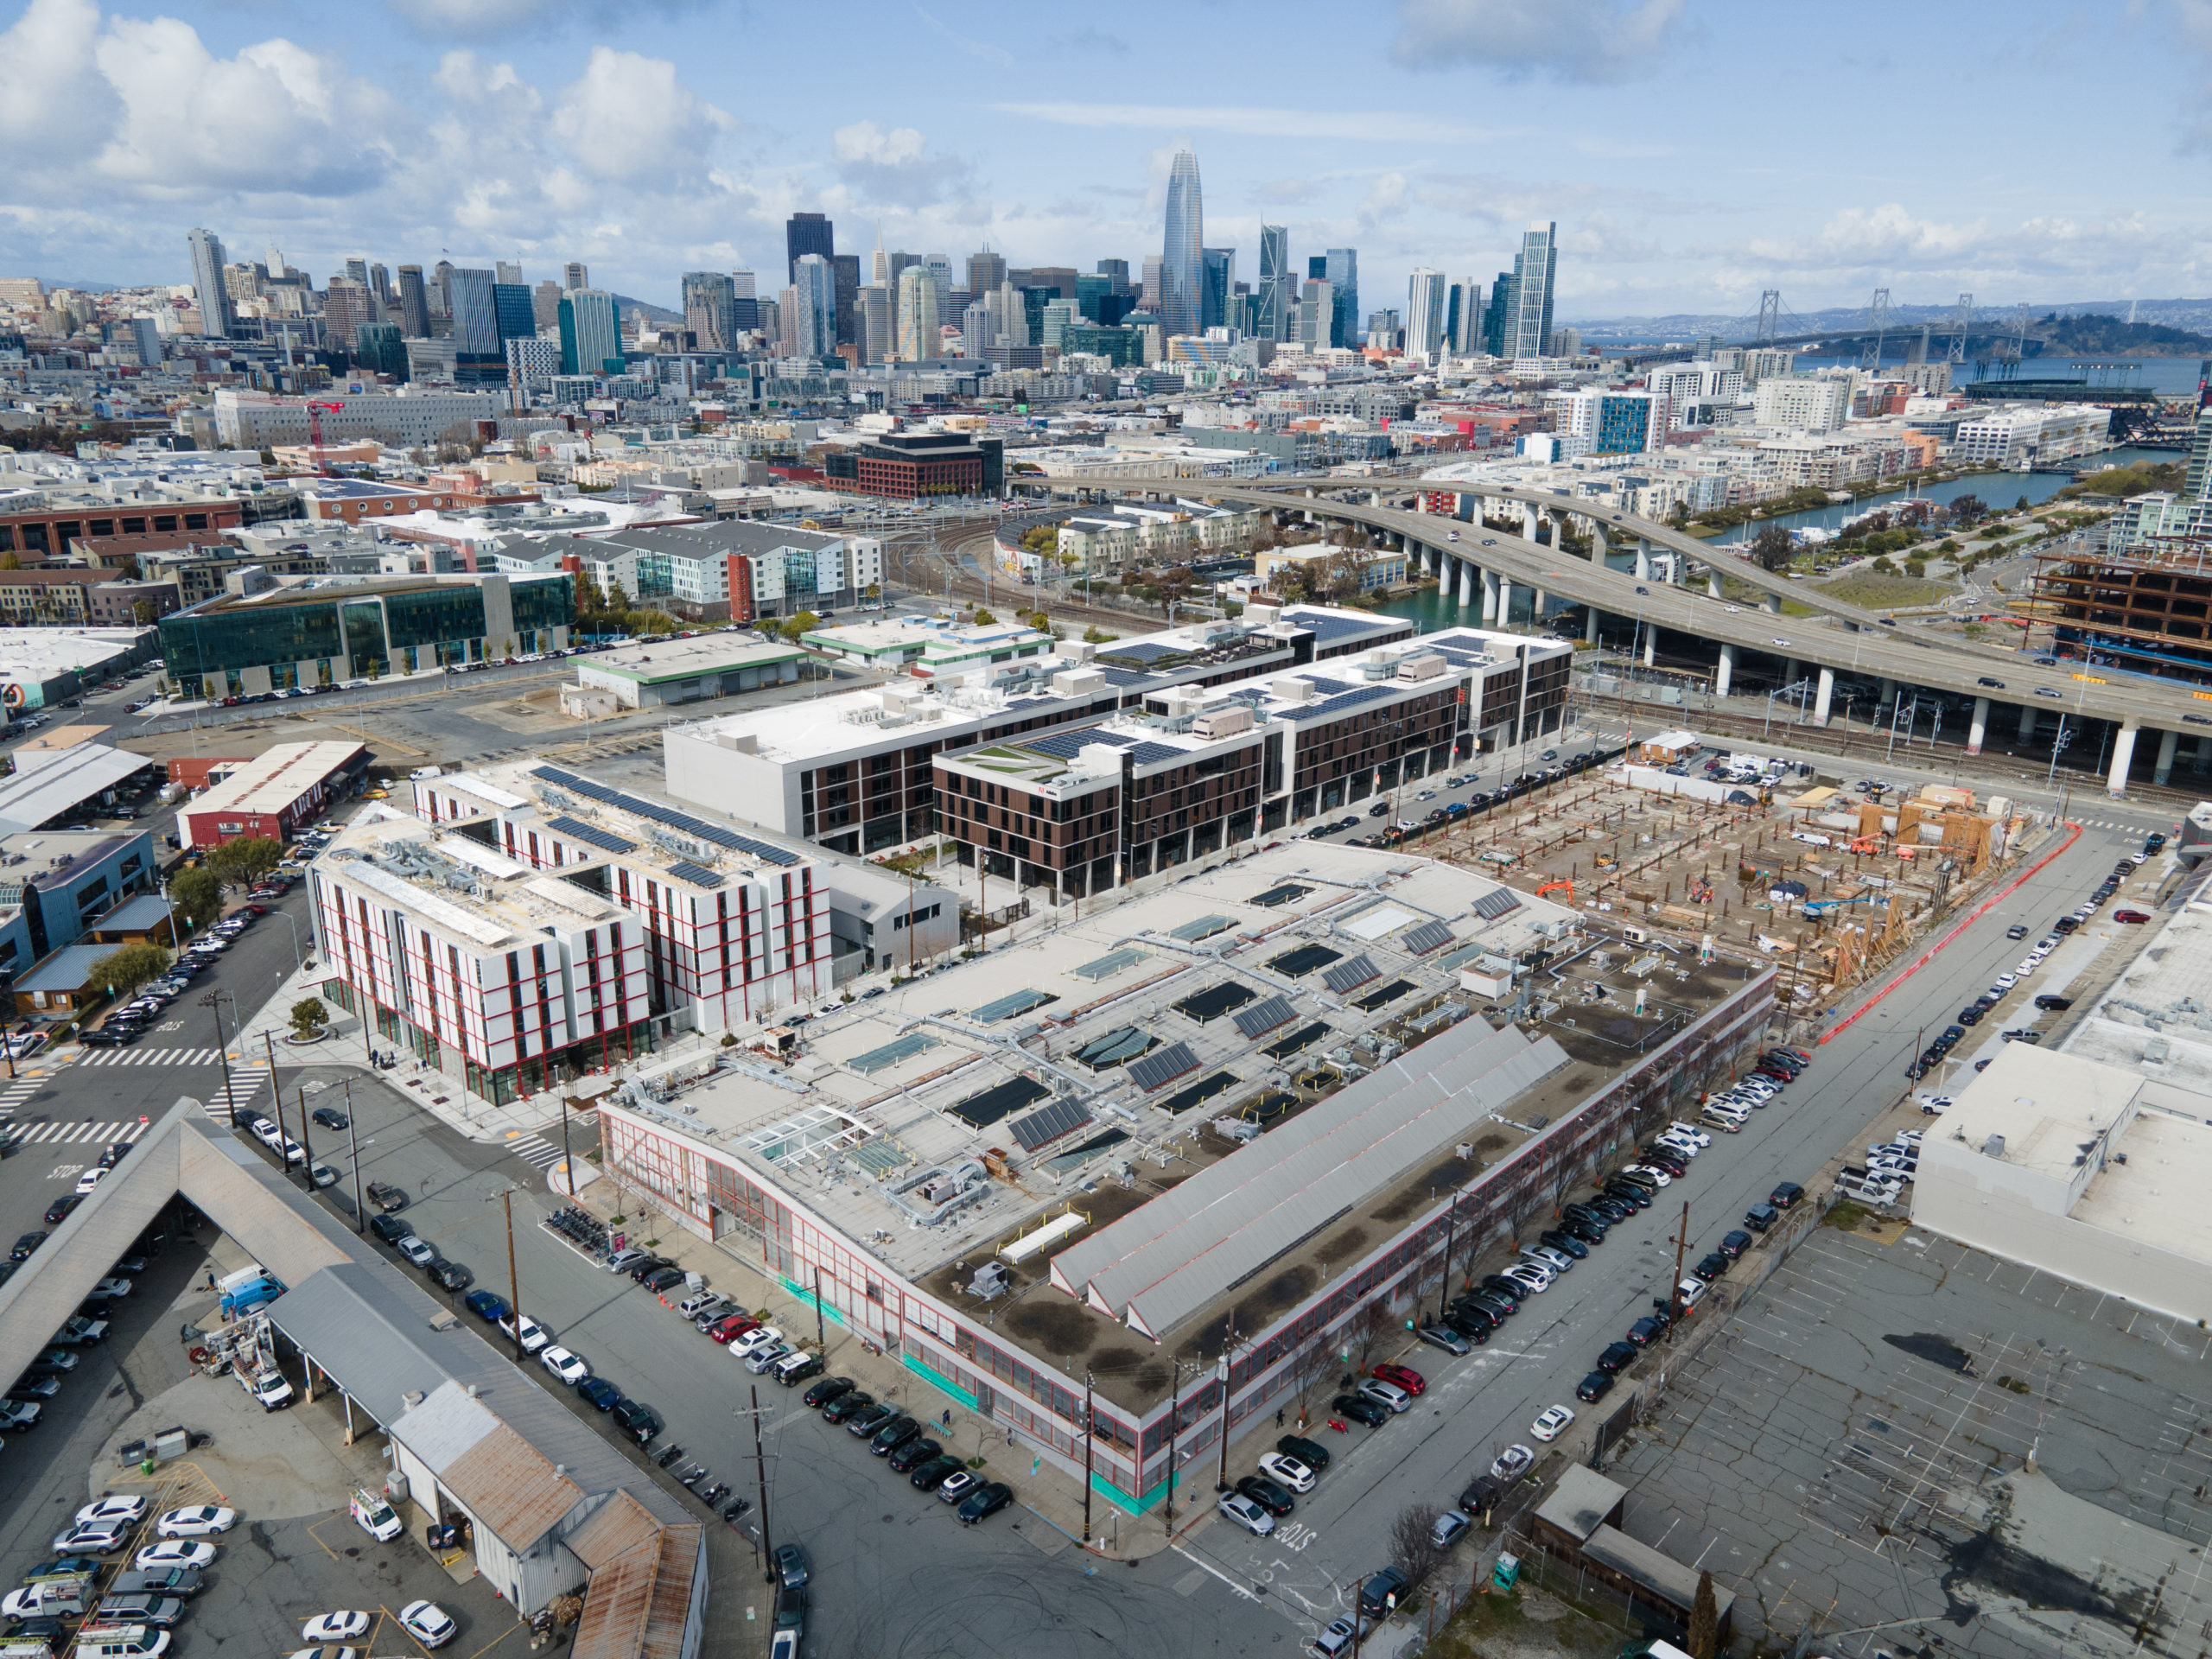 CCA Campus aerial view with the San Francisco skyline in the background